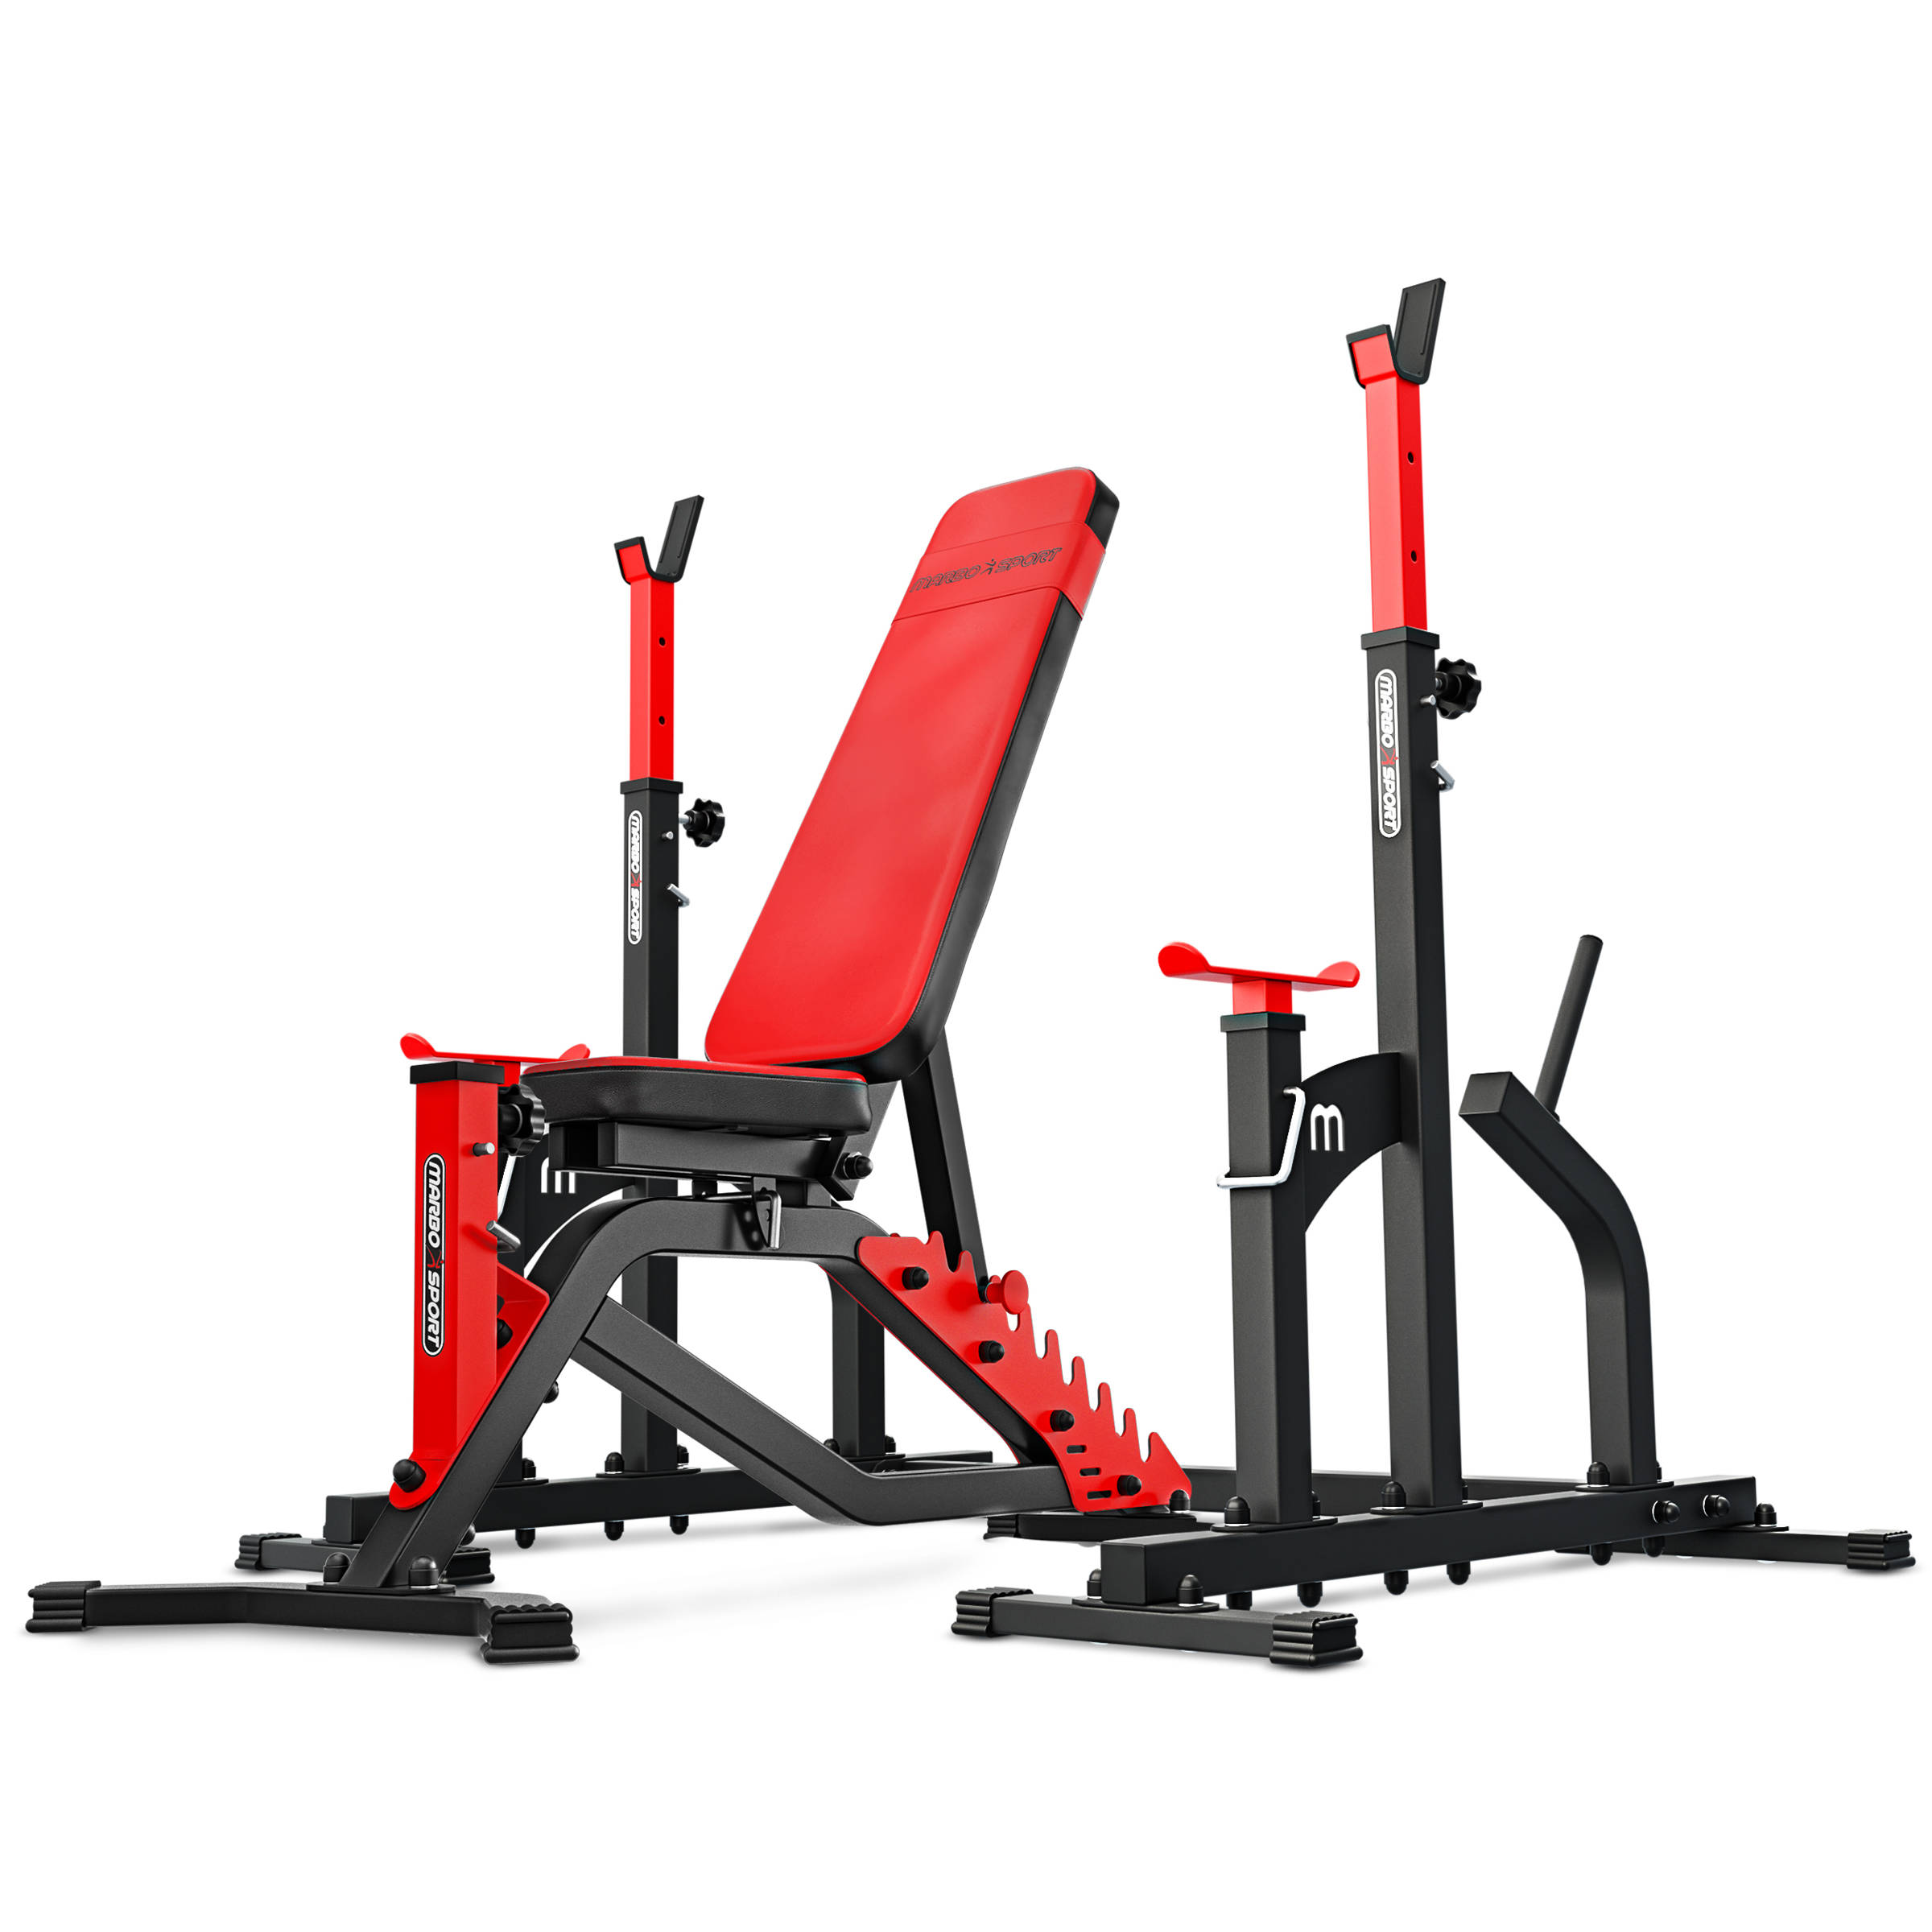 Set MS2 Multi-adjustable bench MS-L101 + Squat and rack with spotter catchers MS-S104 - Marbo Sport lack | equipment \ Exercise sets \ Exercise sets For intermediate |